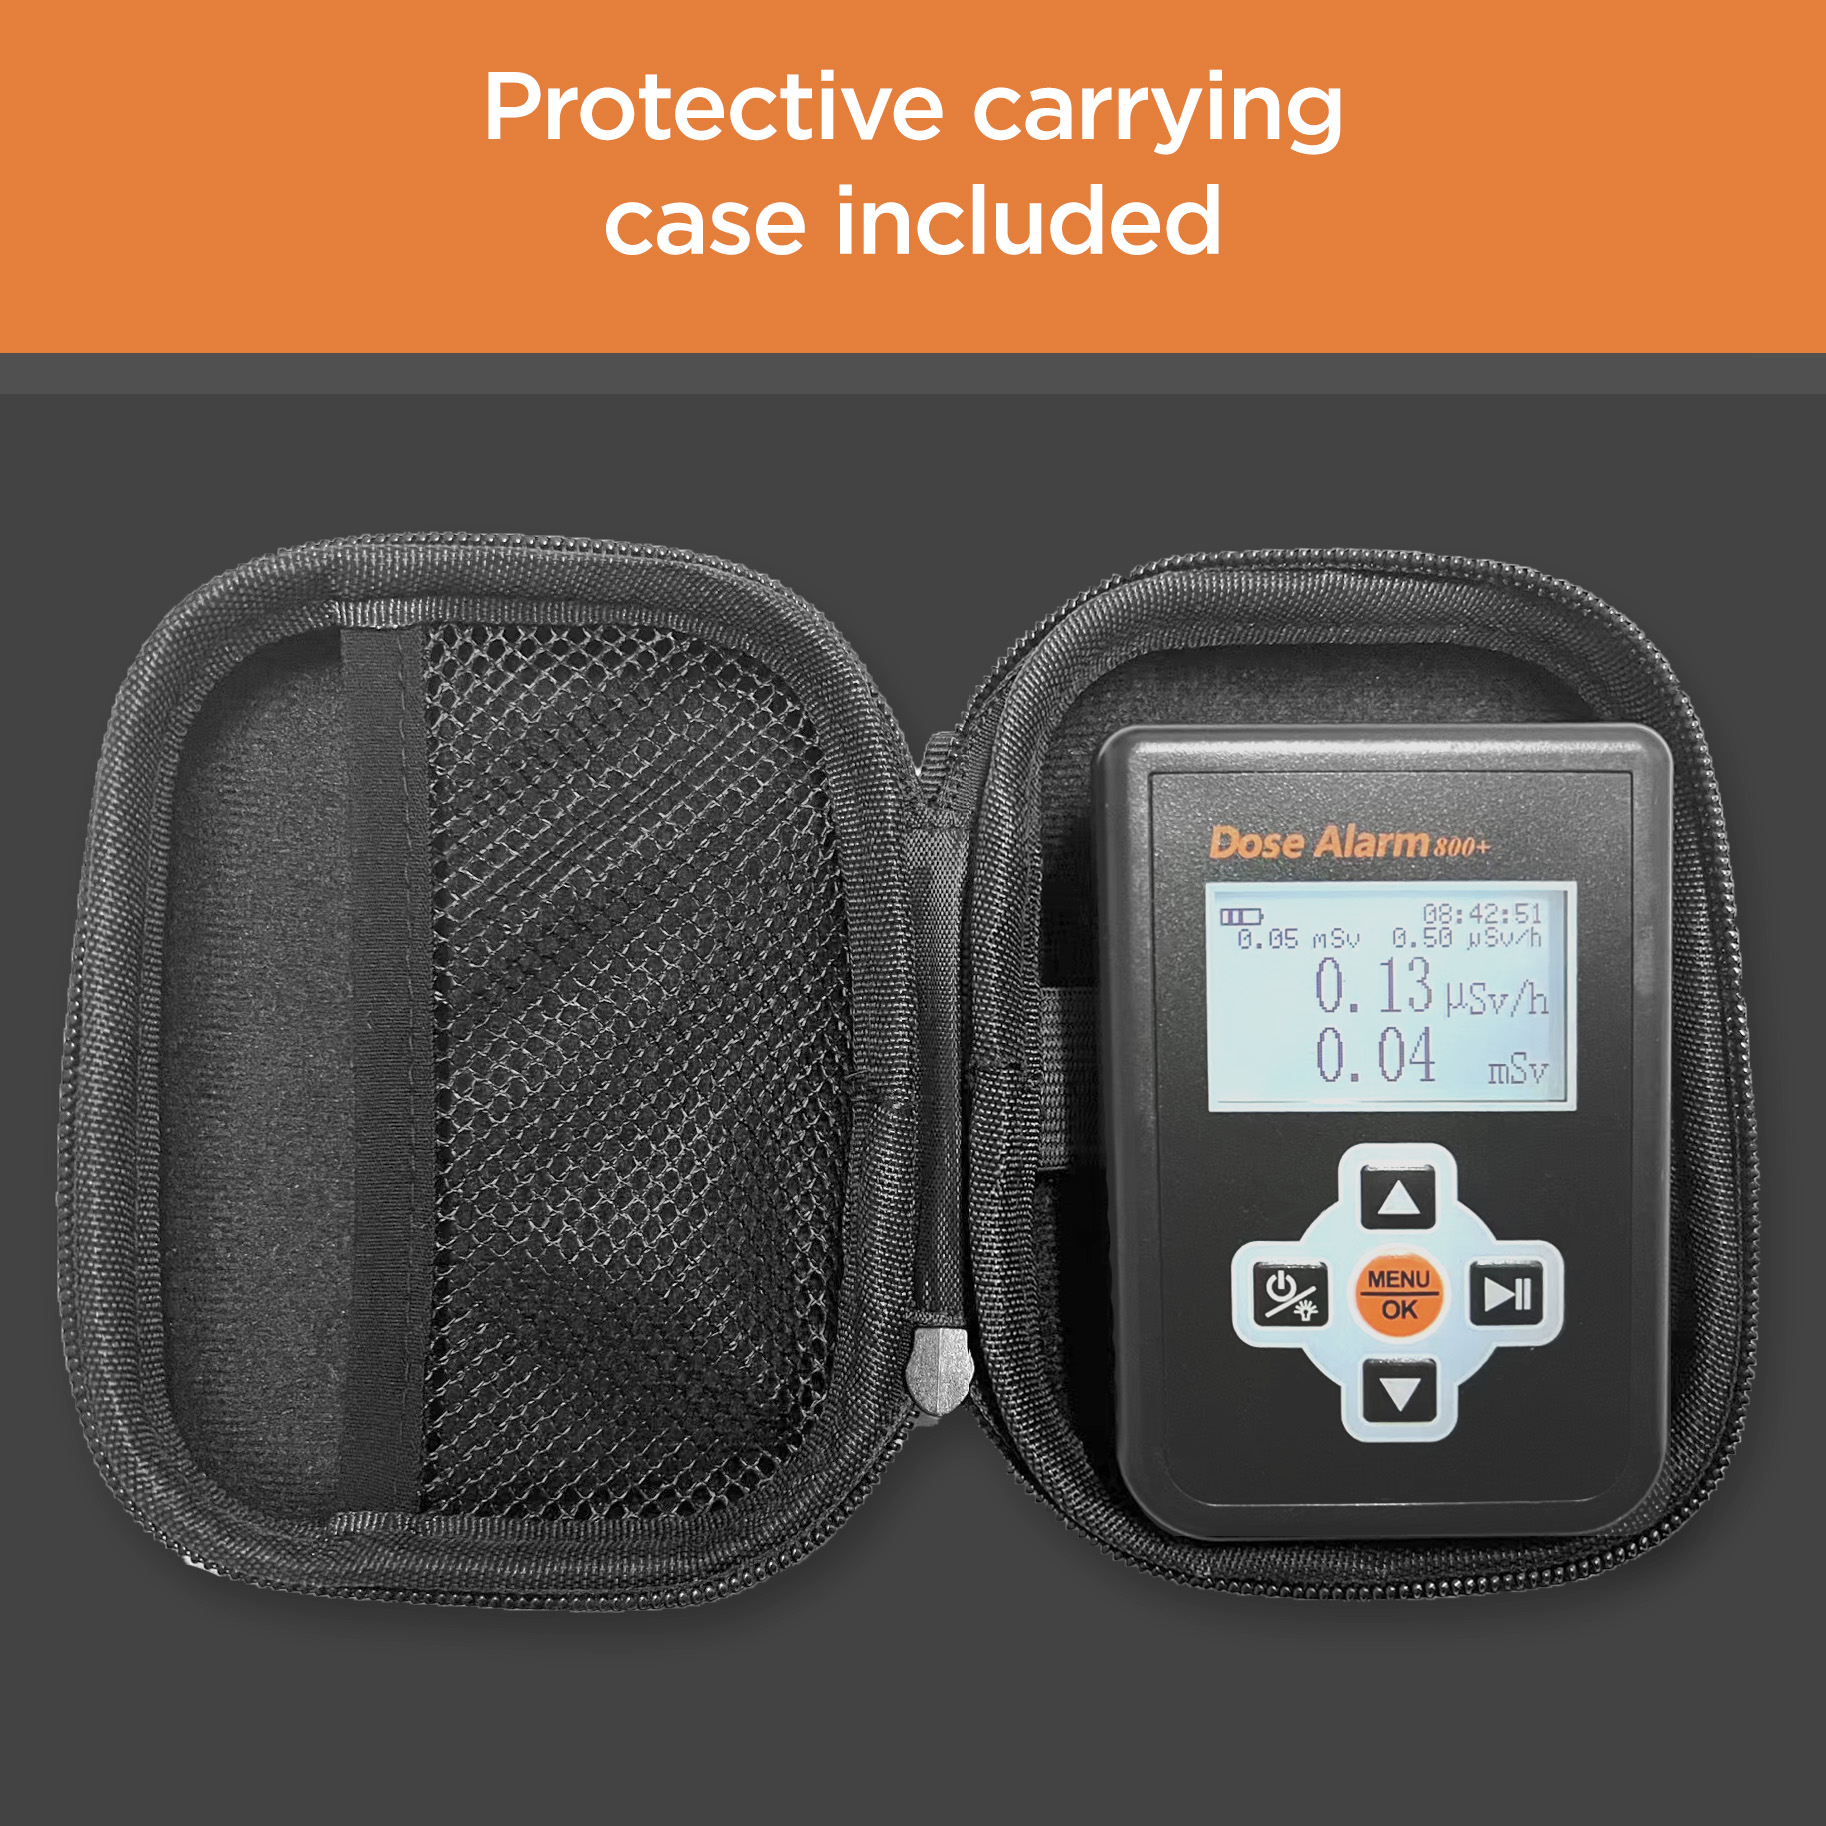 Galvanox Nuclear Radiation Detector Geiger Counter (TX850) IND-Grade  Portable Dosimeter with Carrying Case